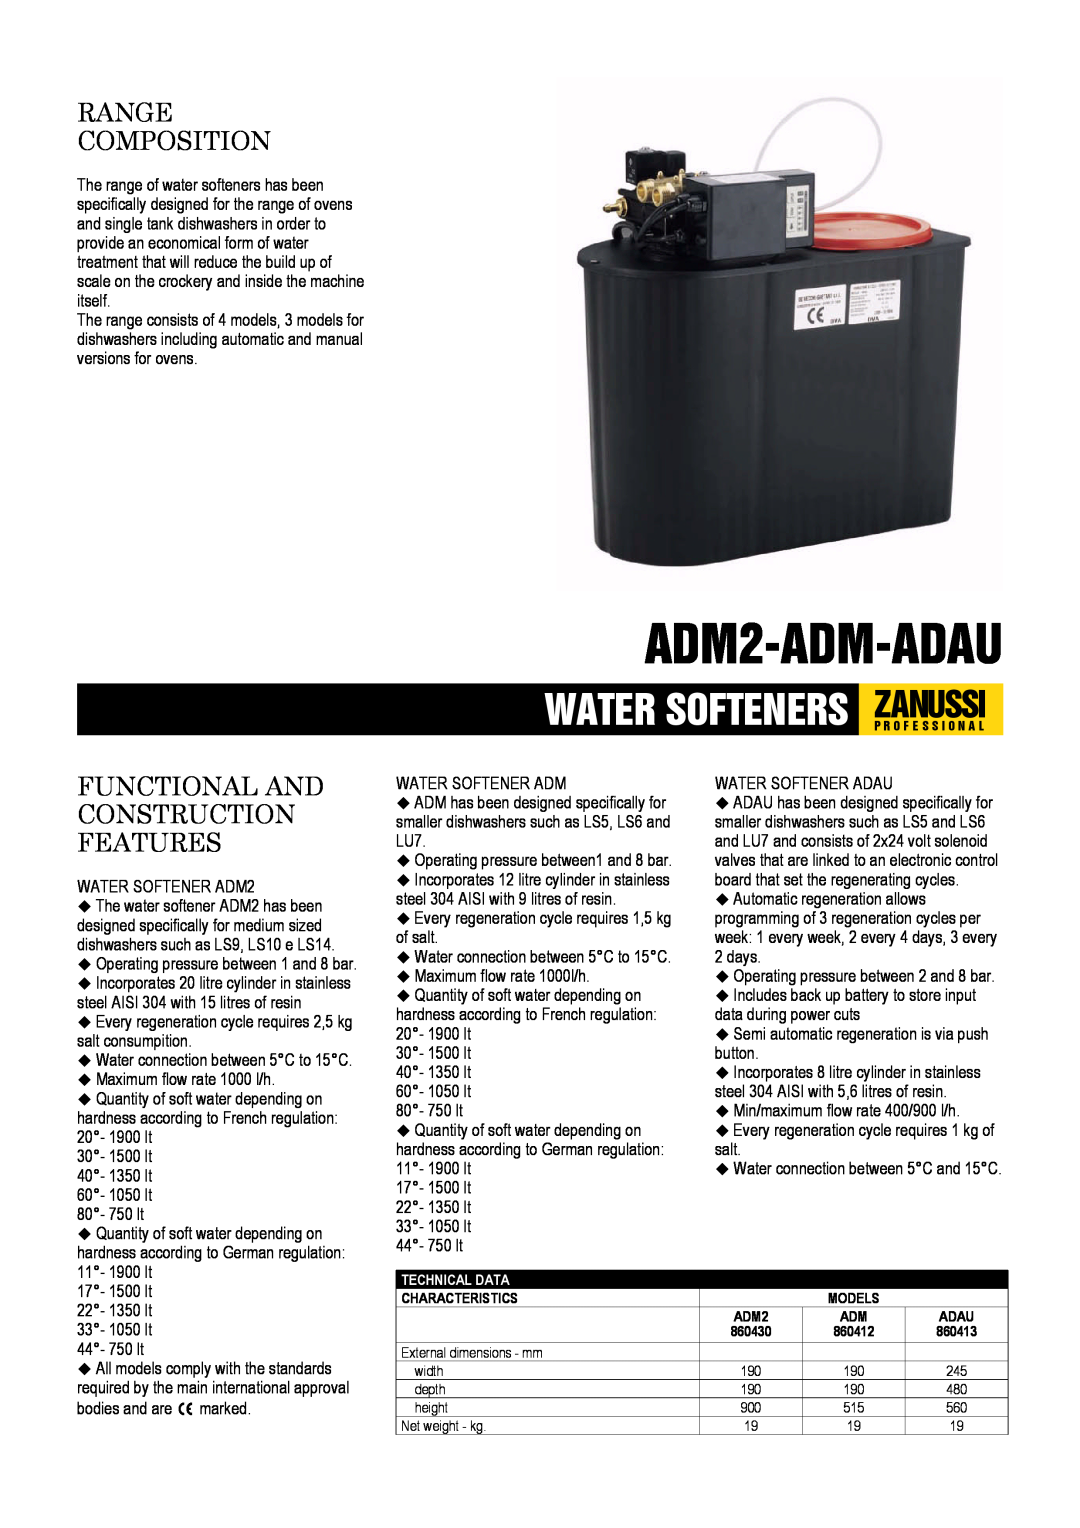 Zanussi 860430, 860413, 860412 dimensions ADM2-ADM-ADAU, Range Composition, Functional And Construction Features 